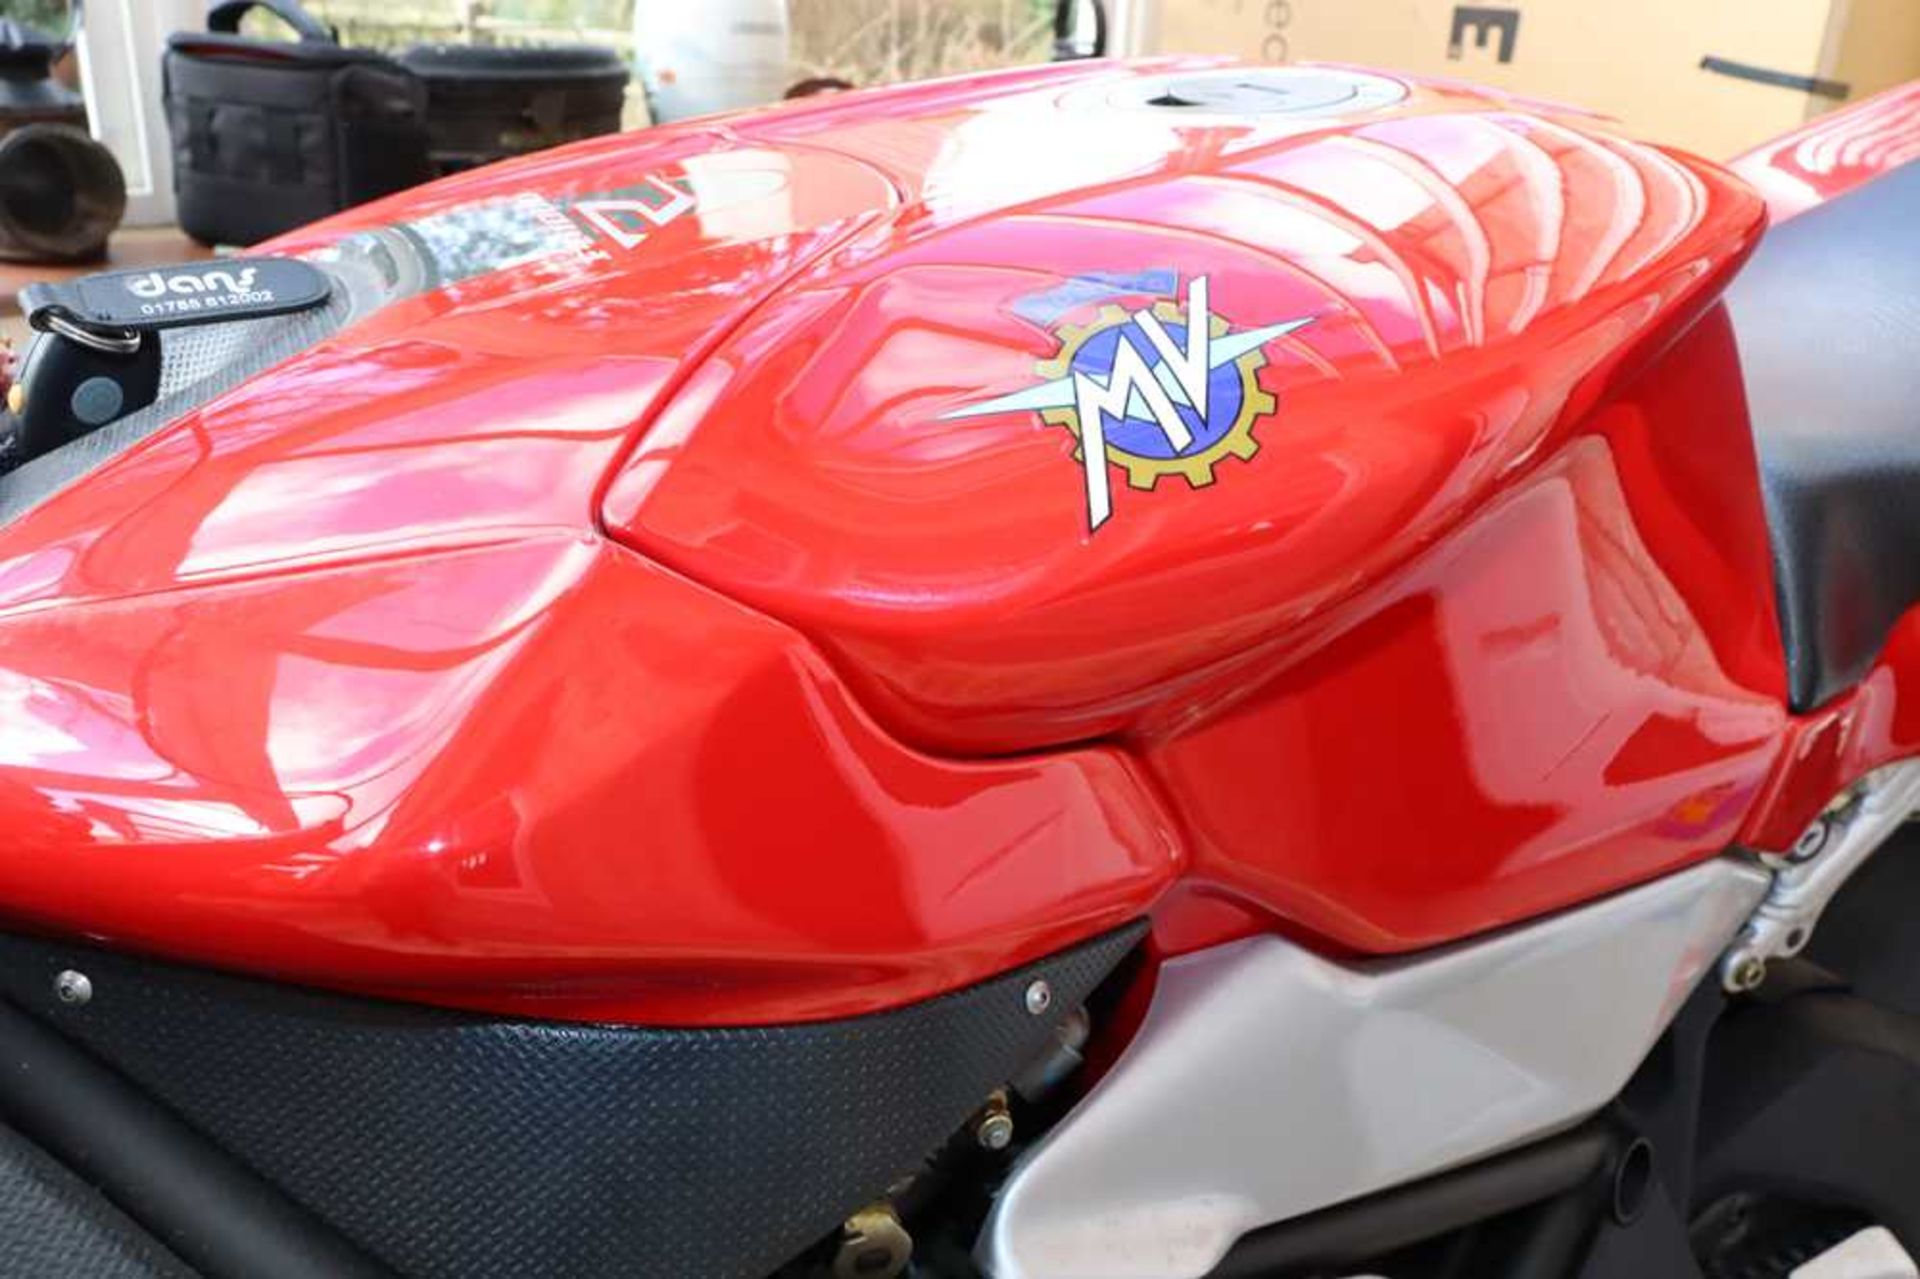 2007 MV Agusta F4 1000 R One owner from new - Image 15 of 41